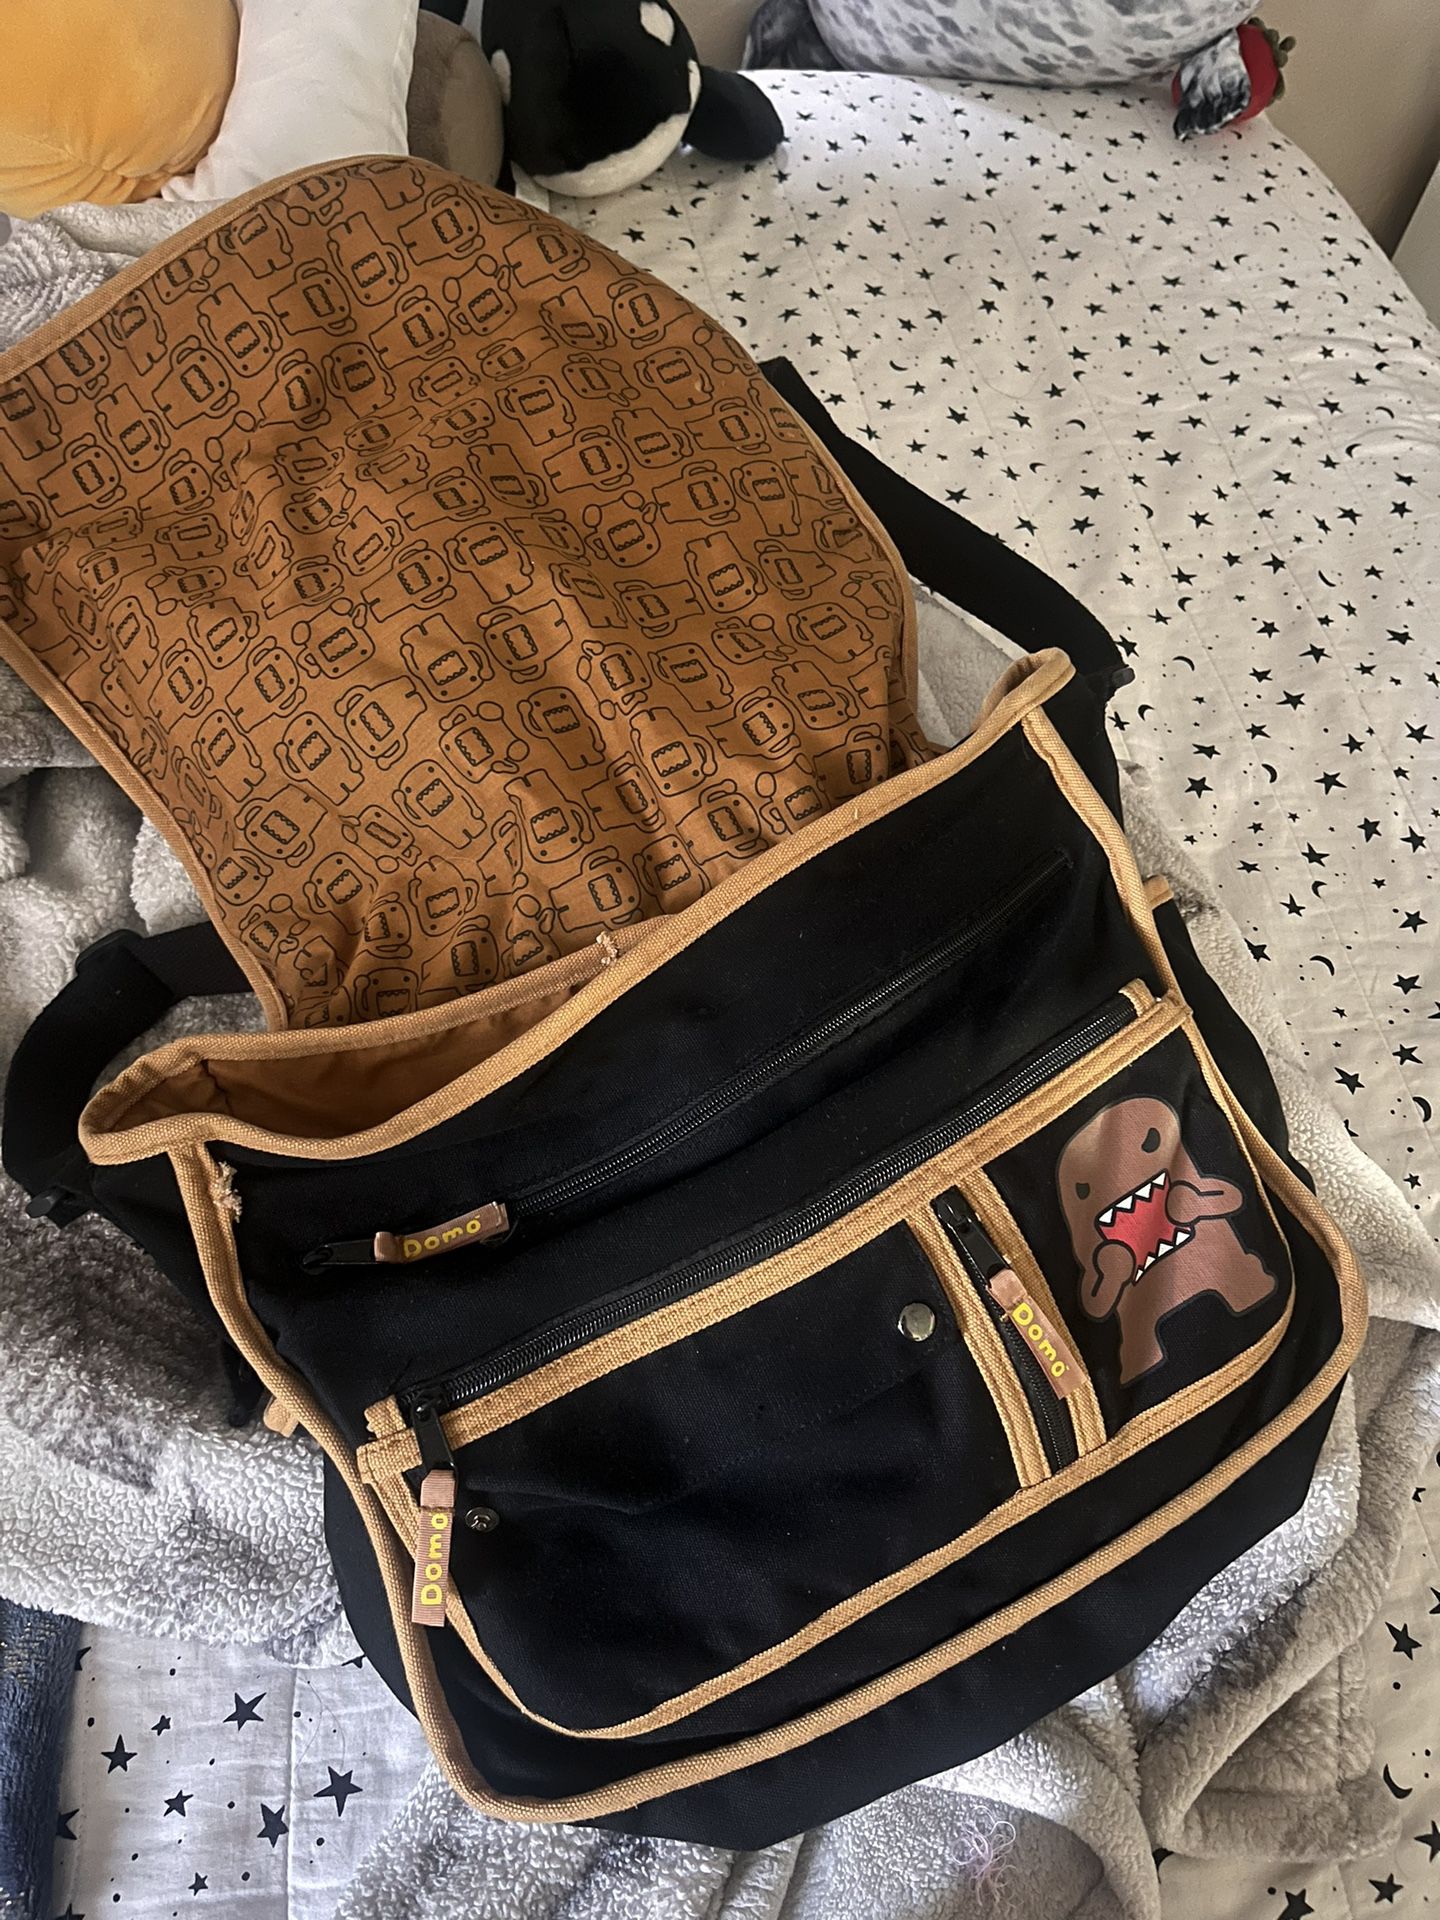 Messenger Bag for Sale in Forest Heights, MD - OfferUp